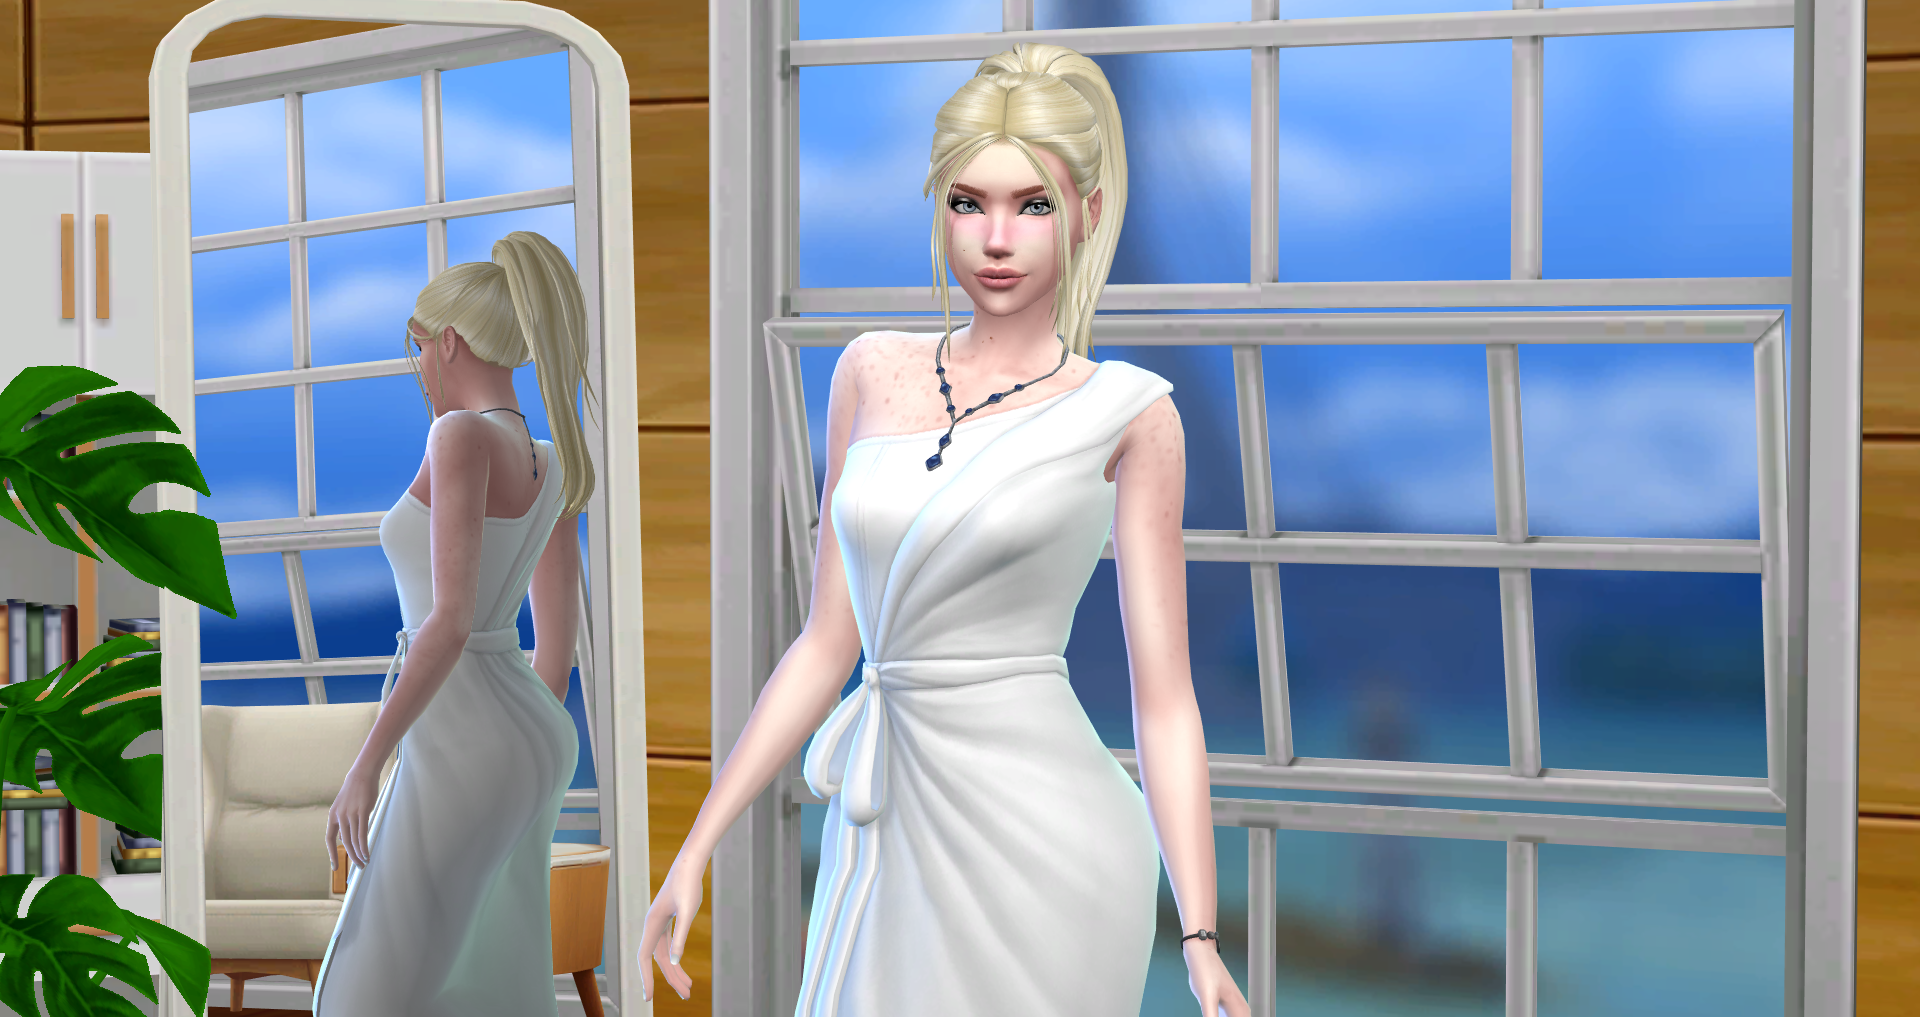 Gabrielle Lablonde The Model Screenshots The Sims 4 Sims Households Curseforge 